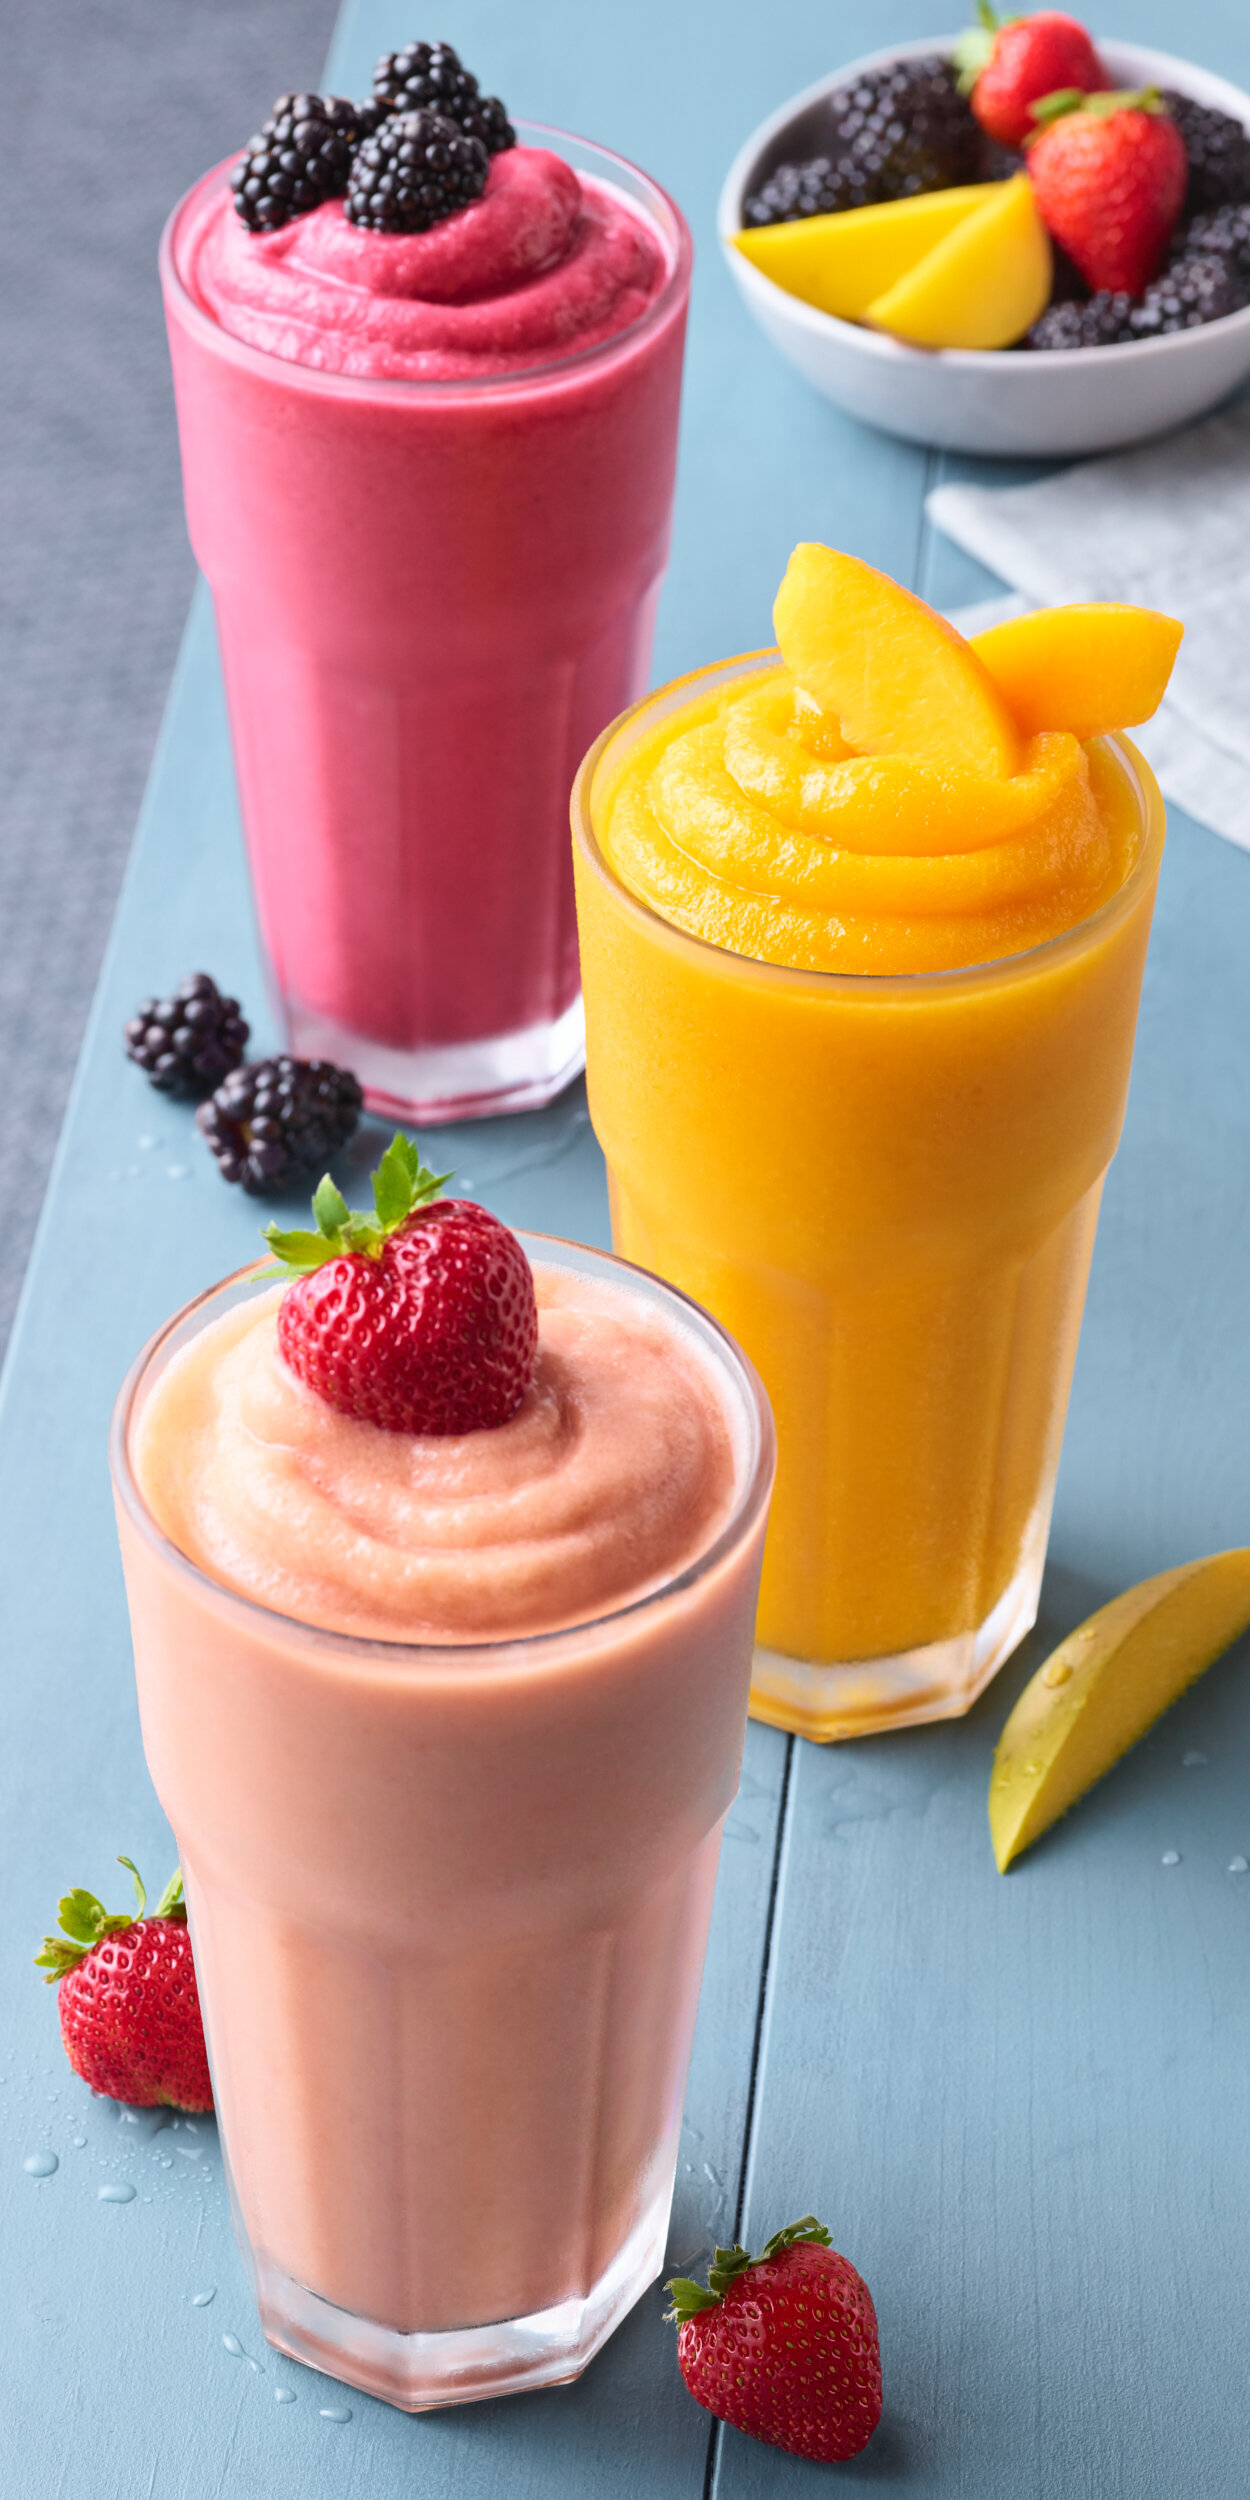 Three freshly made smoothies on a blue tabletop; strawberry, mango and blackberry.